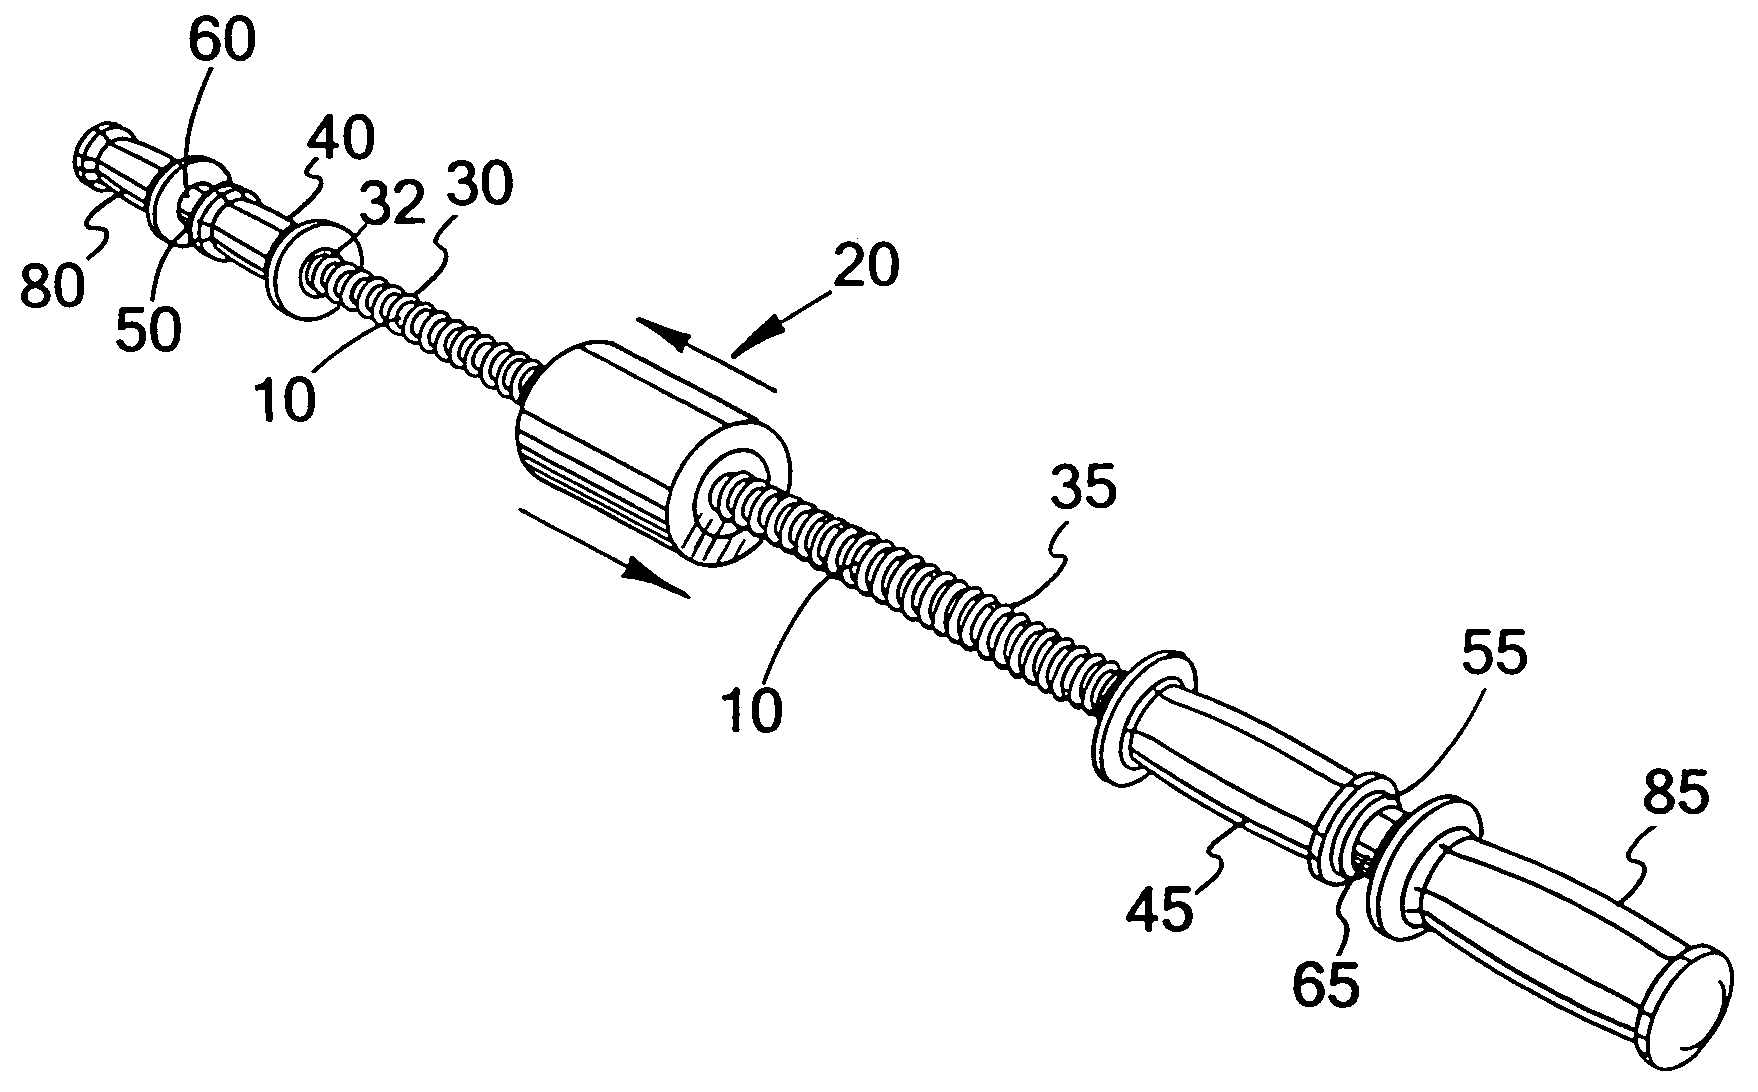 Reciprocating weight exercise apparatus